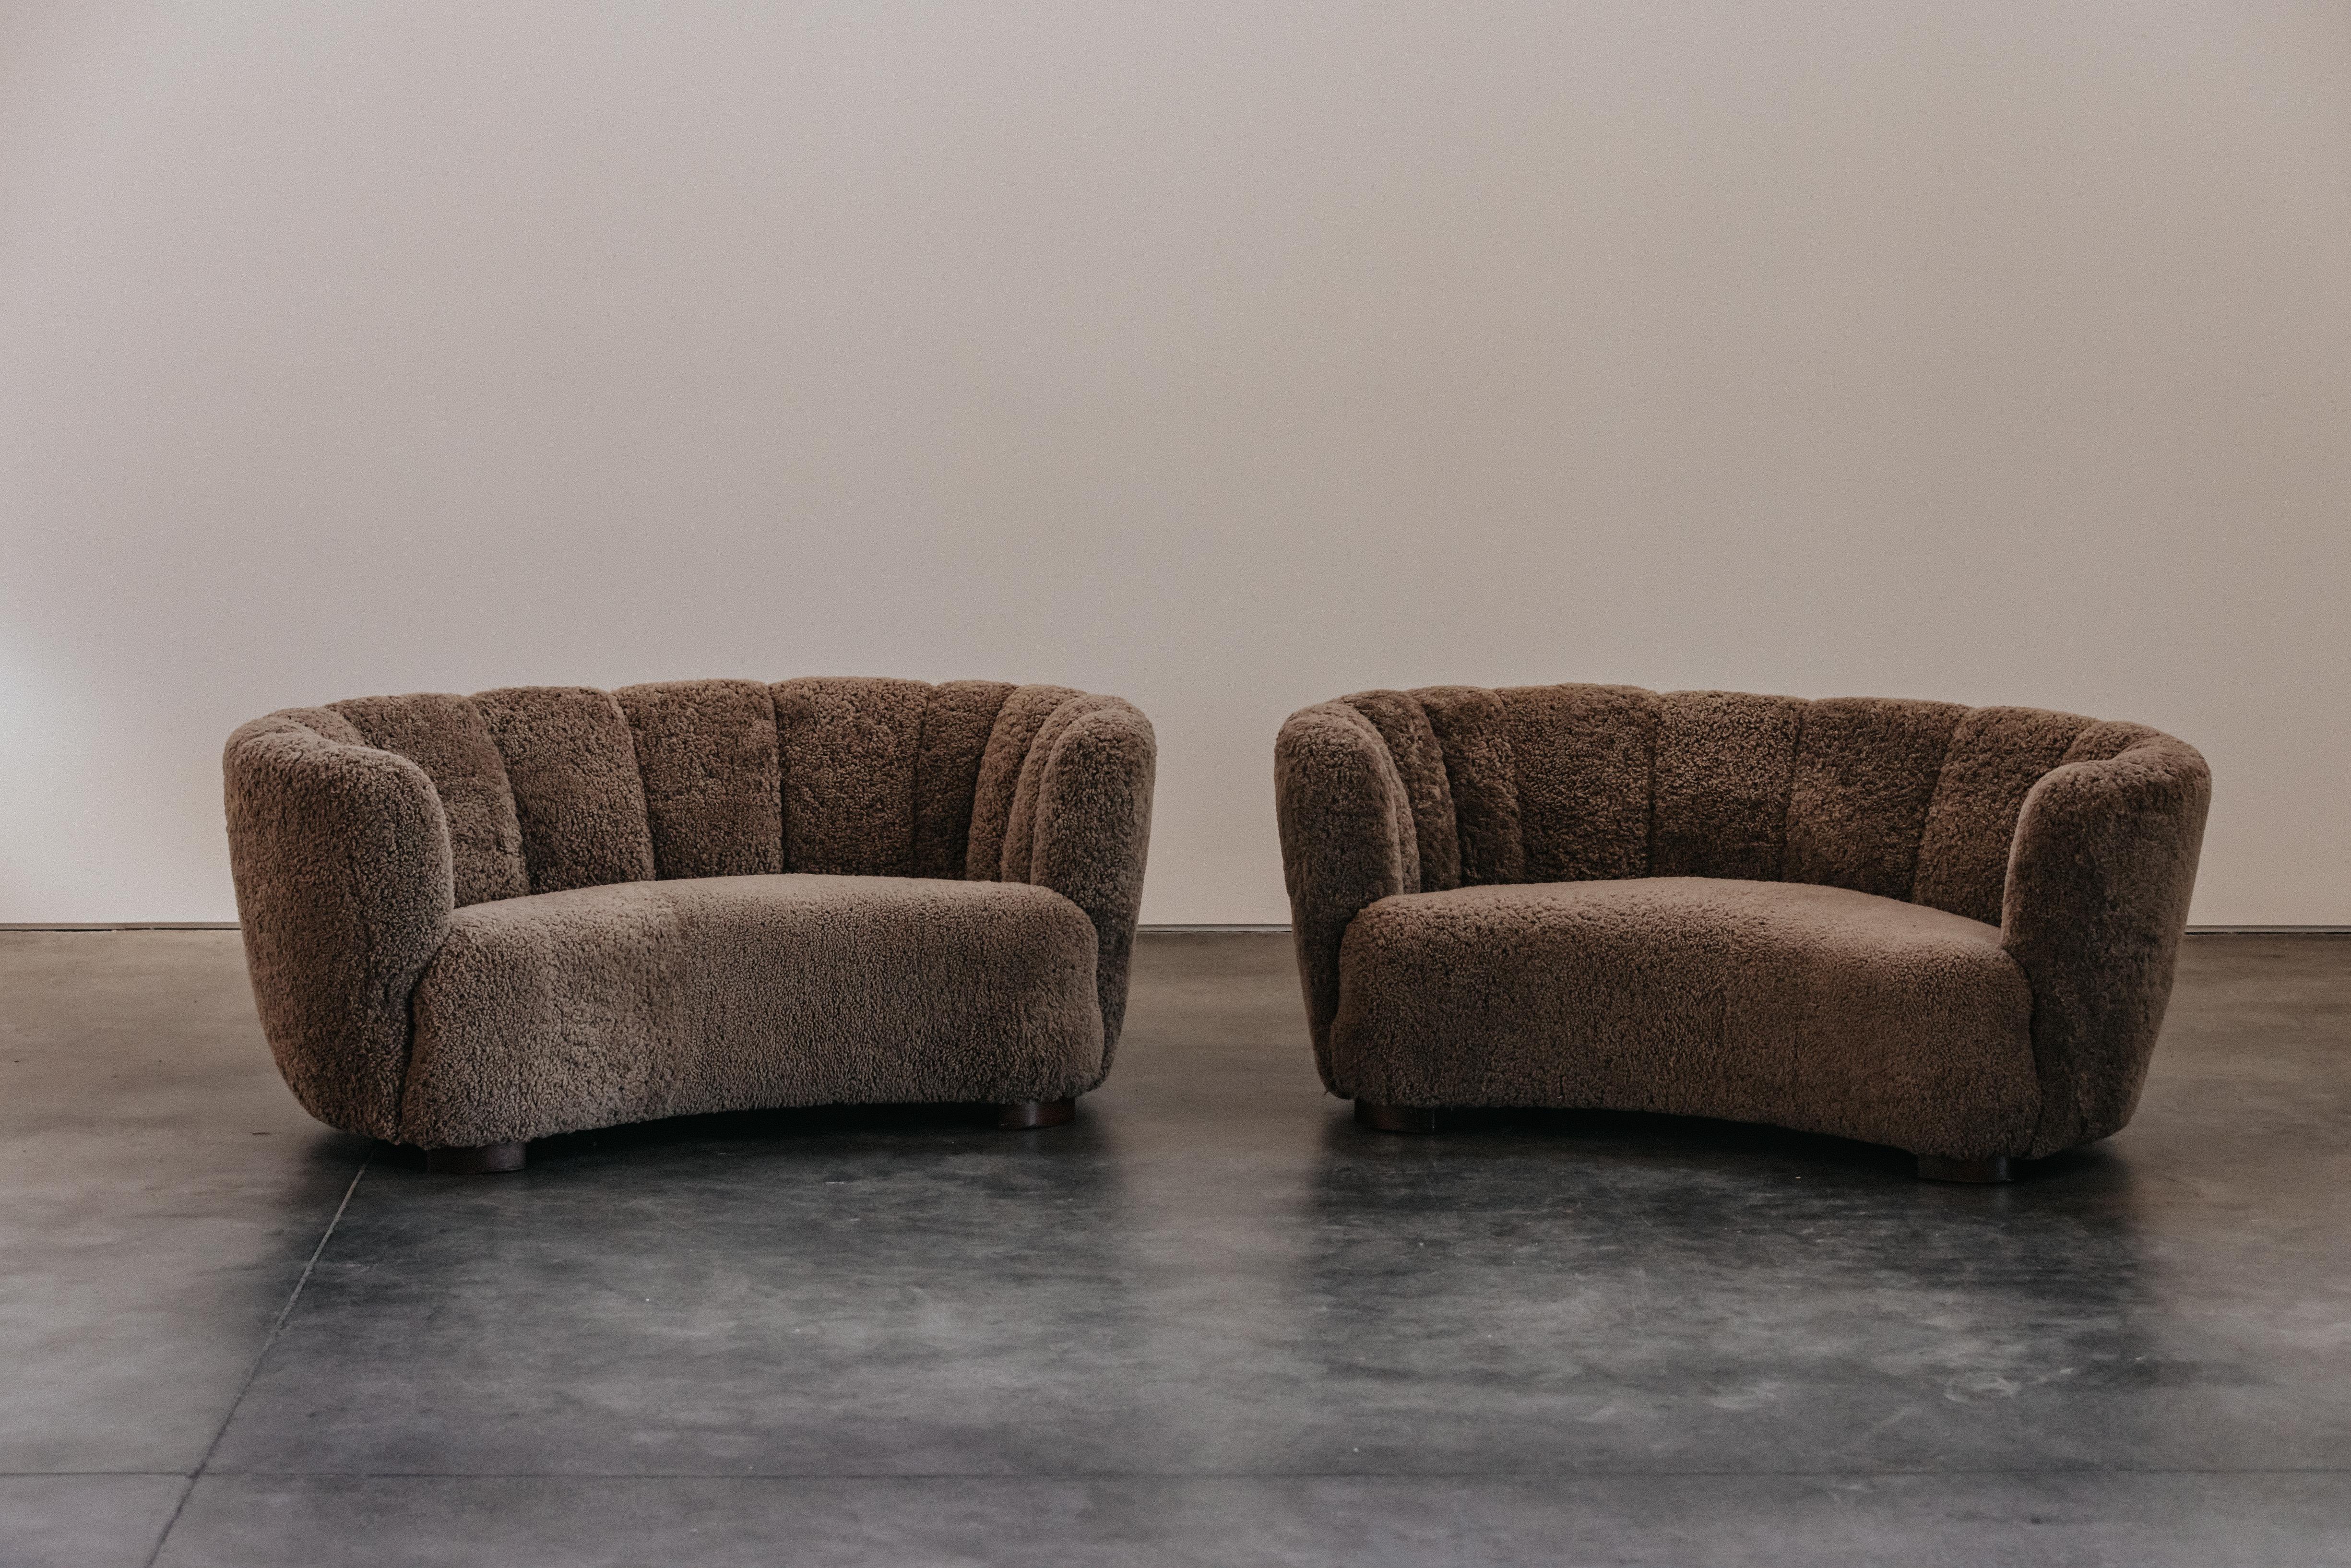 Vintage Pair Of Sheepskin Cabinetmaker Sofas From Denmark, Circa 1960.  Nice identical pair by a Danish cabinetmaker, later upholstered in soft brown grey shearing.  Excellent condition.